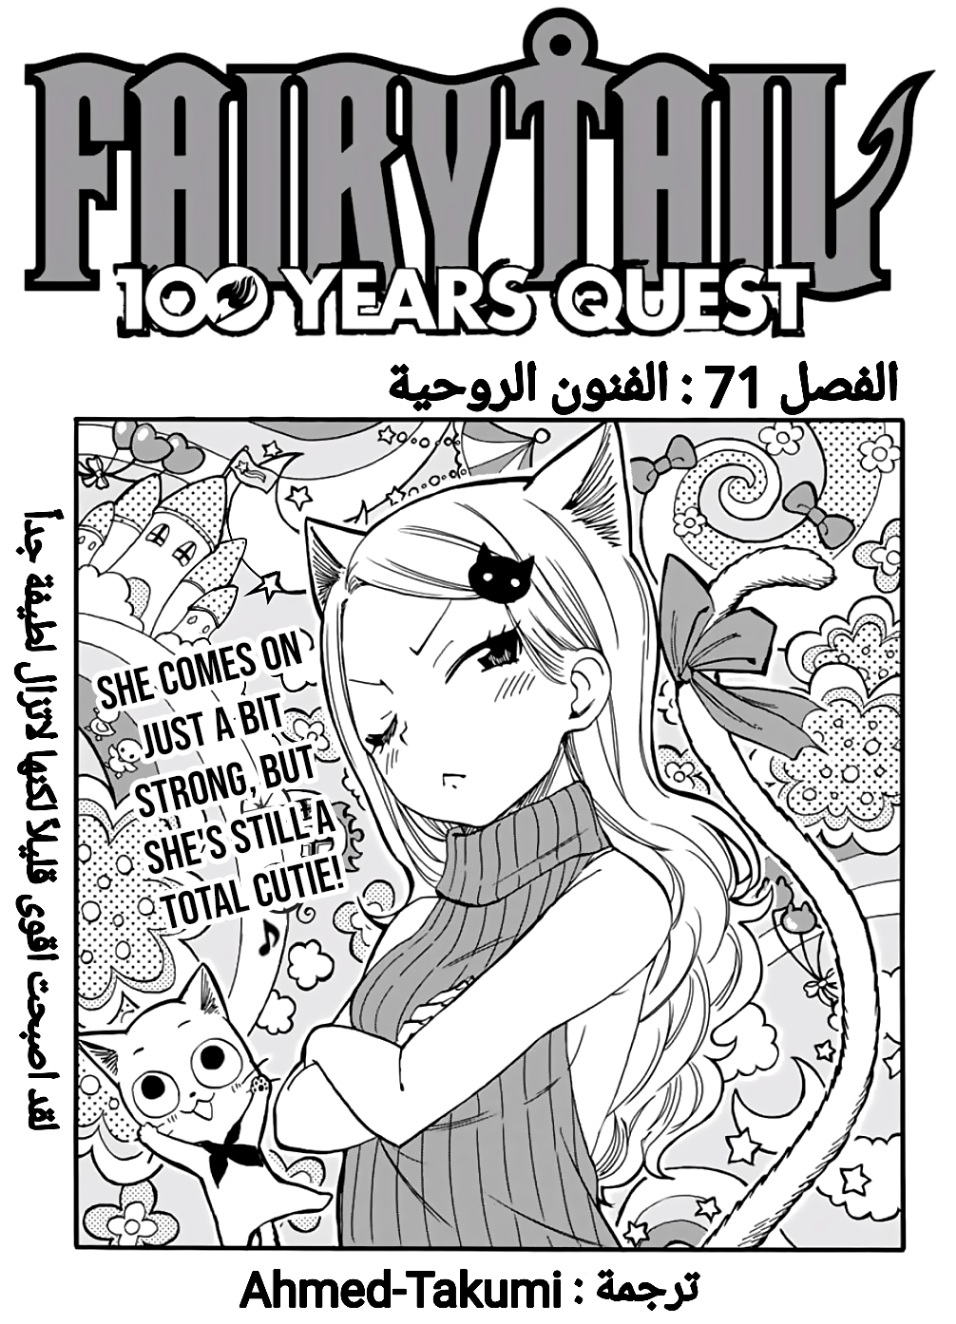 Fairy Tail 100 Years Quest: Chapter 71 - Page 1